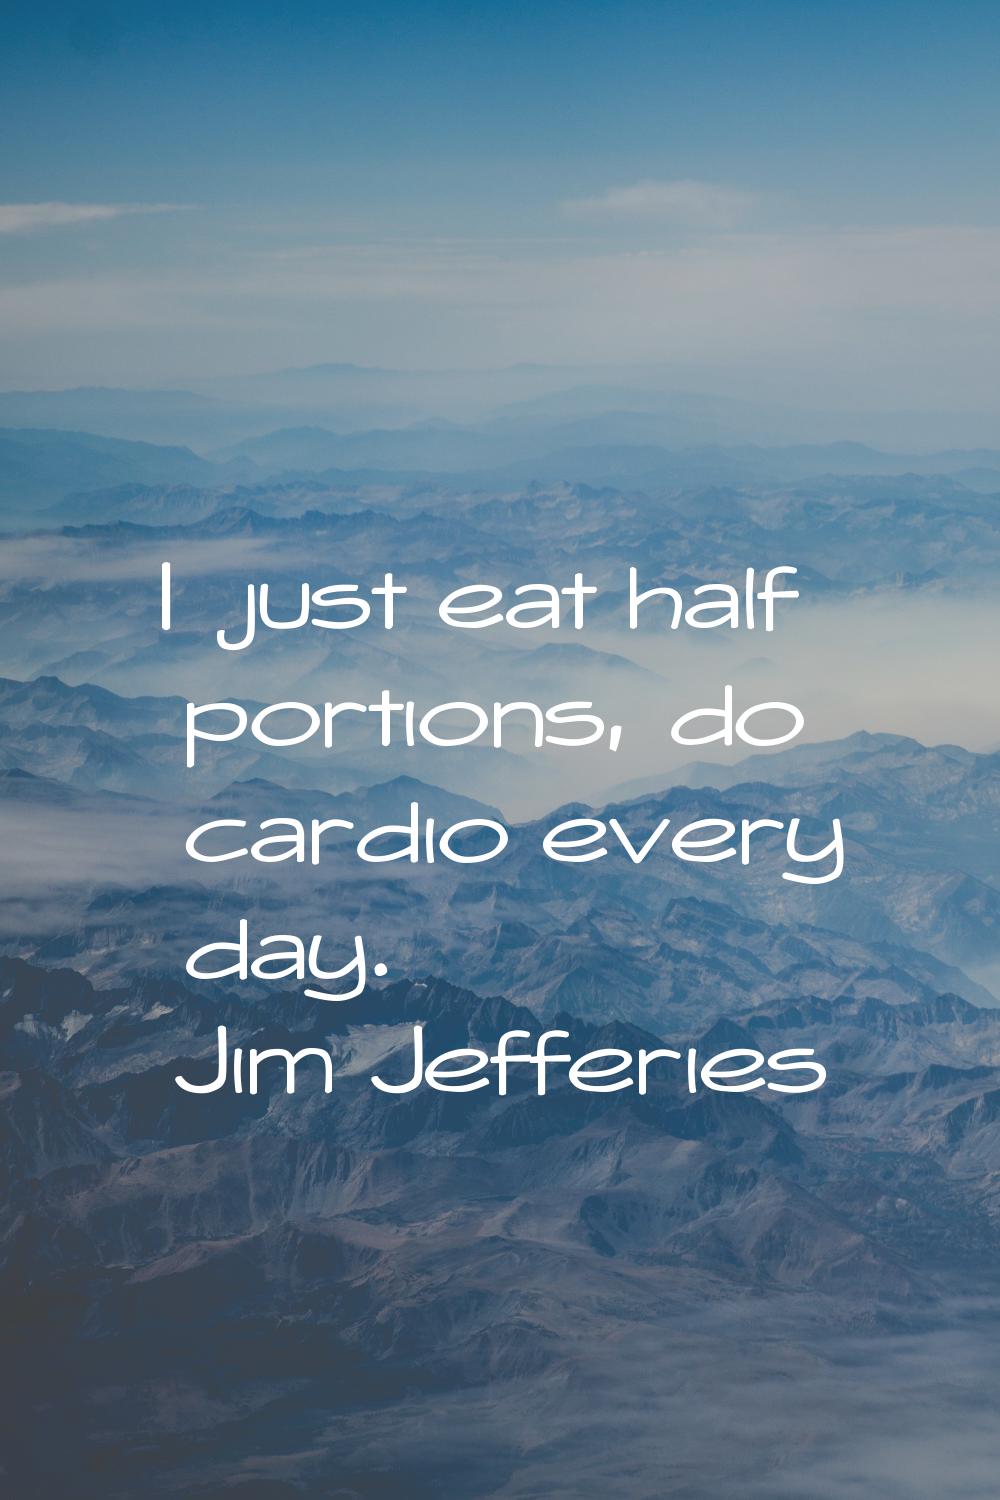 I just eat half portions, do cardio every day.